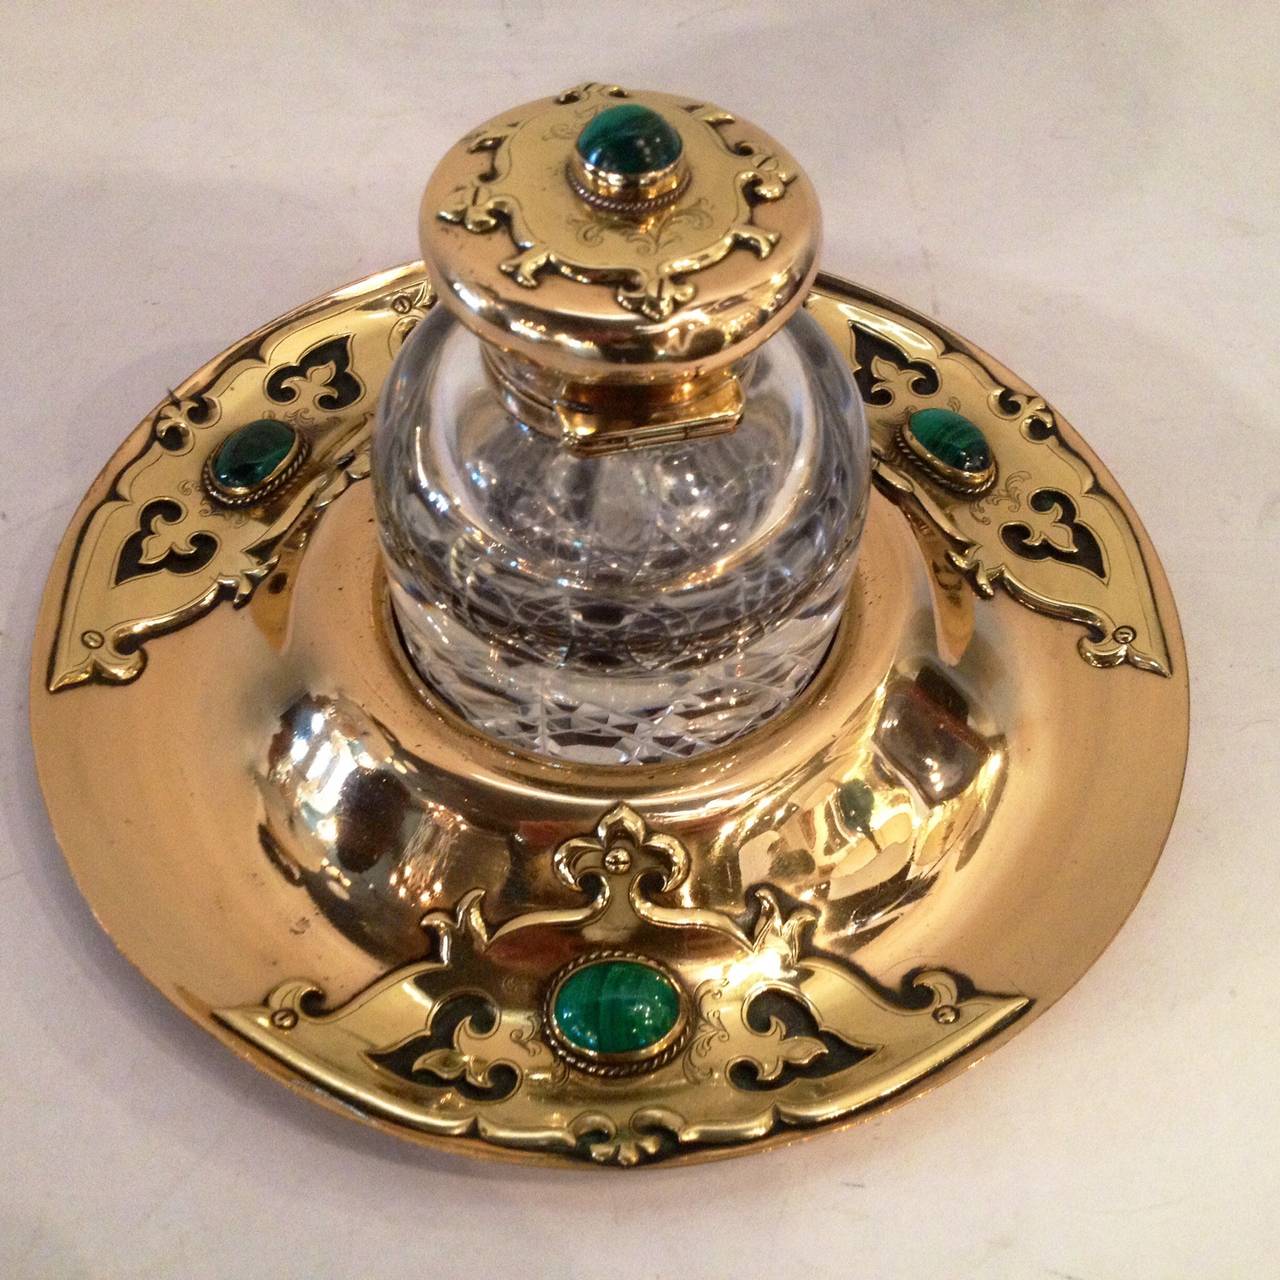 Rare and unusual Art Nouveau brass crystal malachite decorated inkwell with circular base.